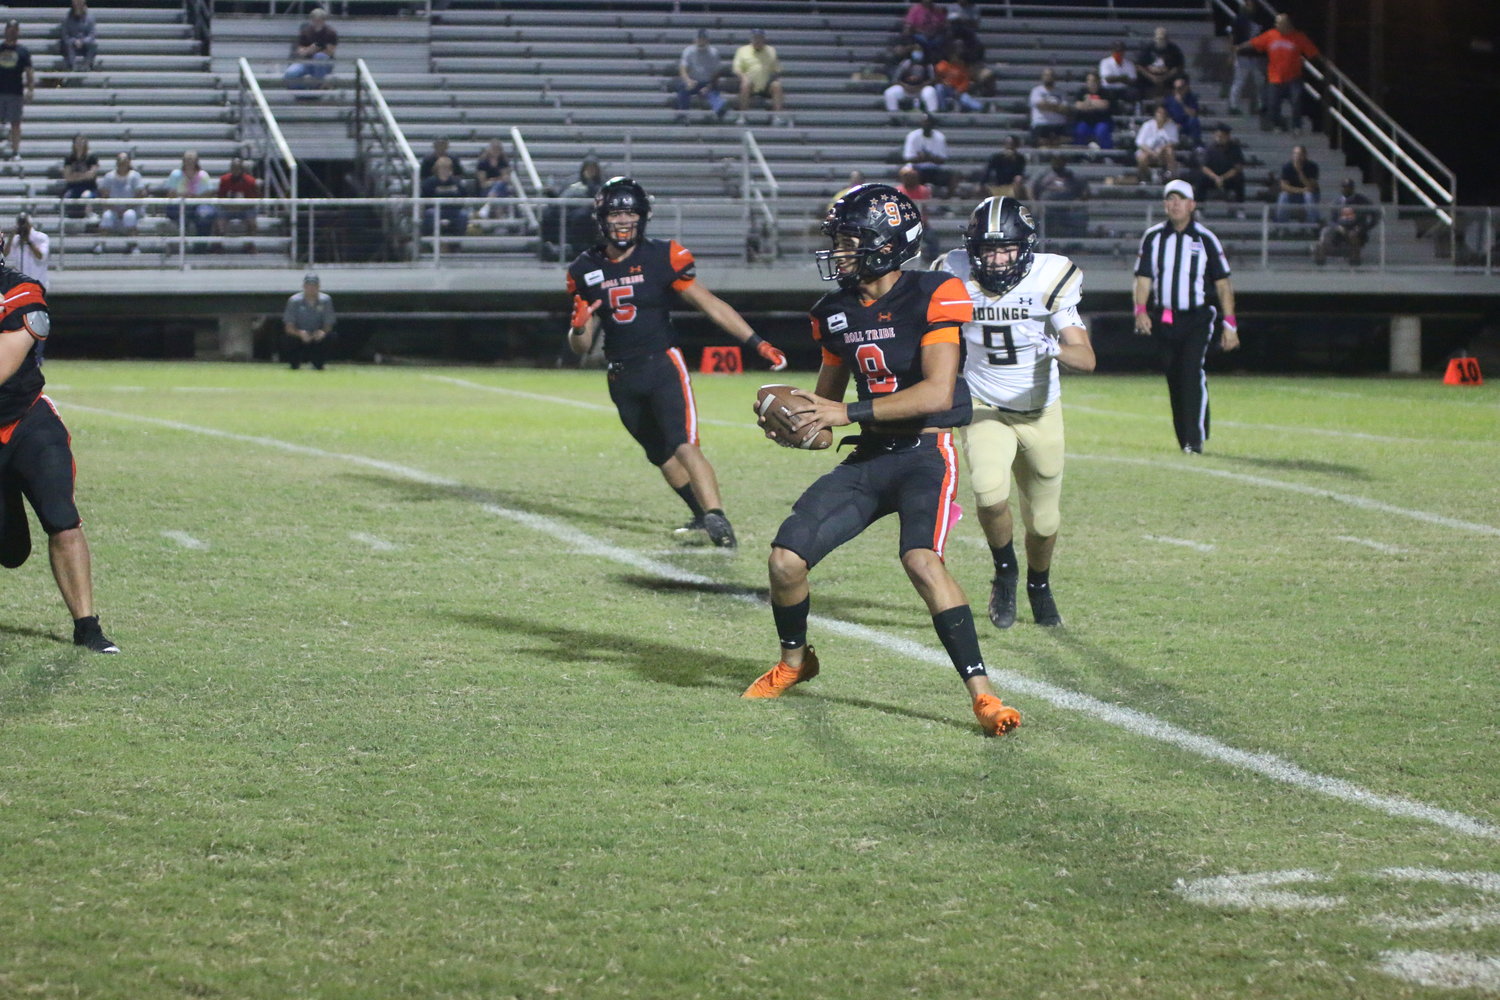 Quarterback Tyrann Webb replaced Johnson in the second half and led the Apaches to their final touchdown.